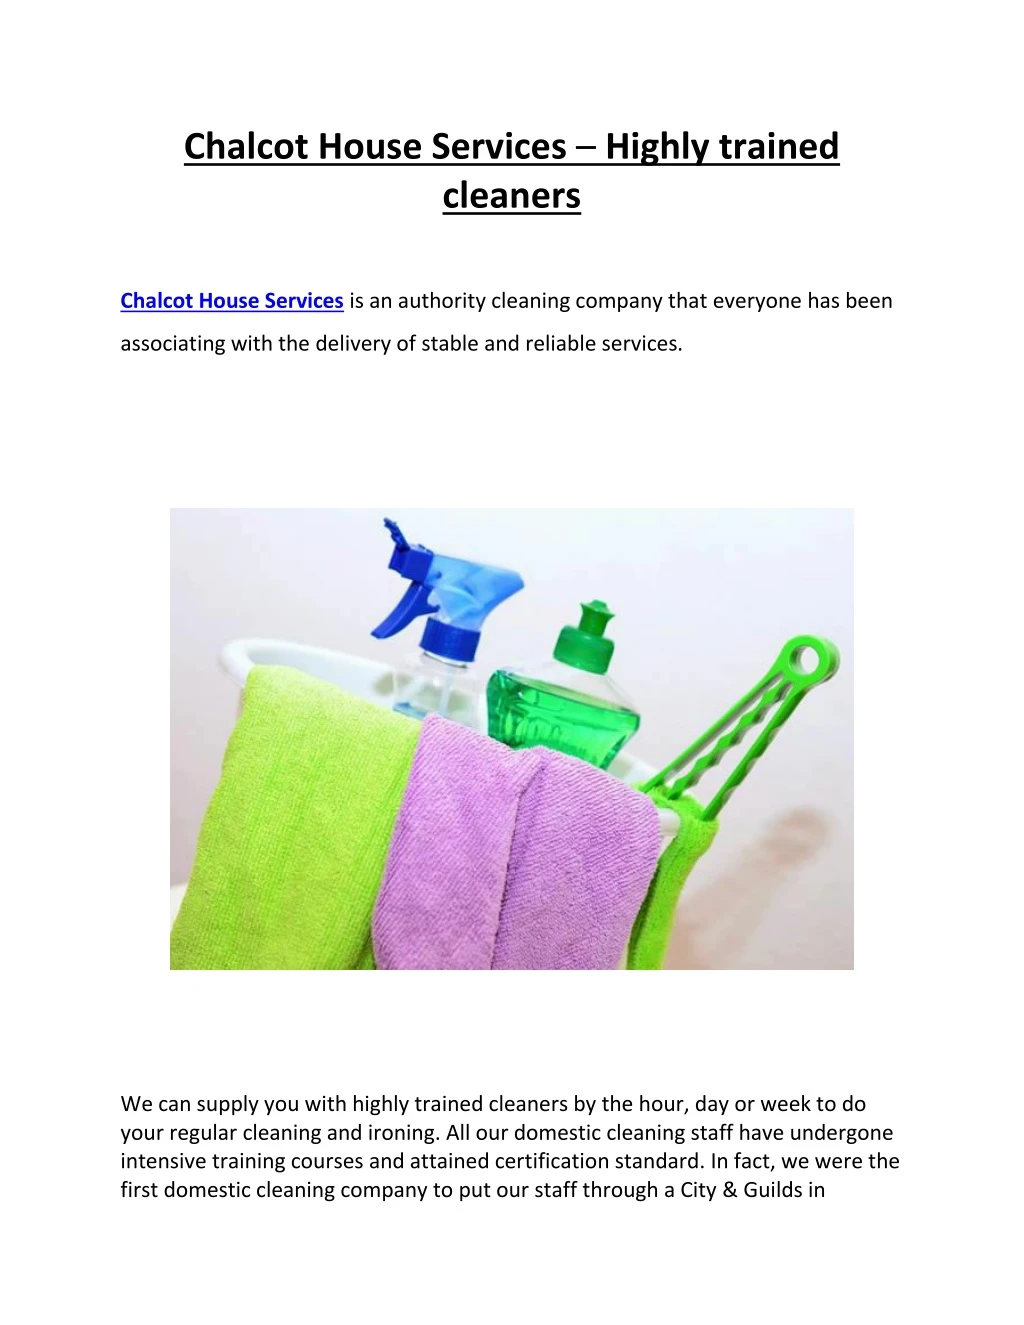 chalcot house services highly trained cleaners